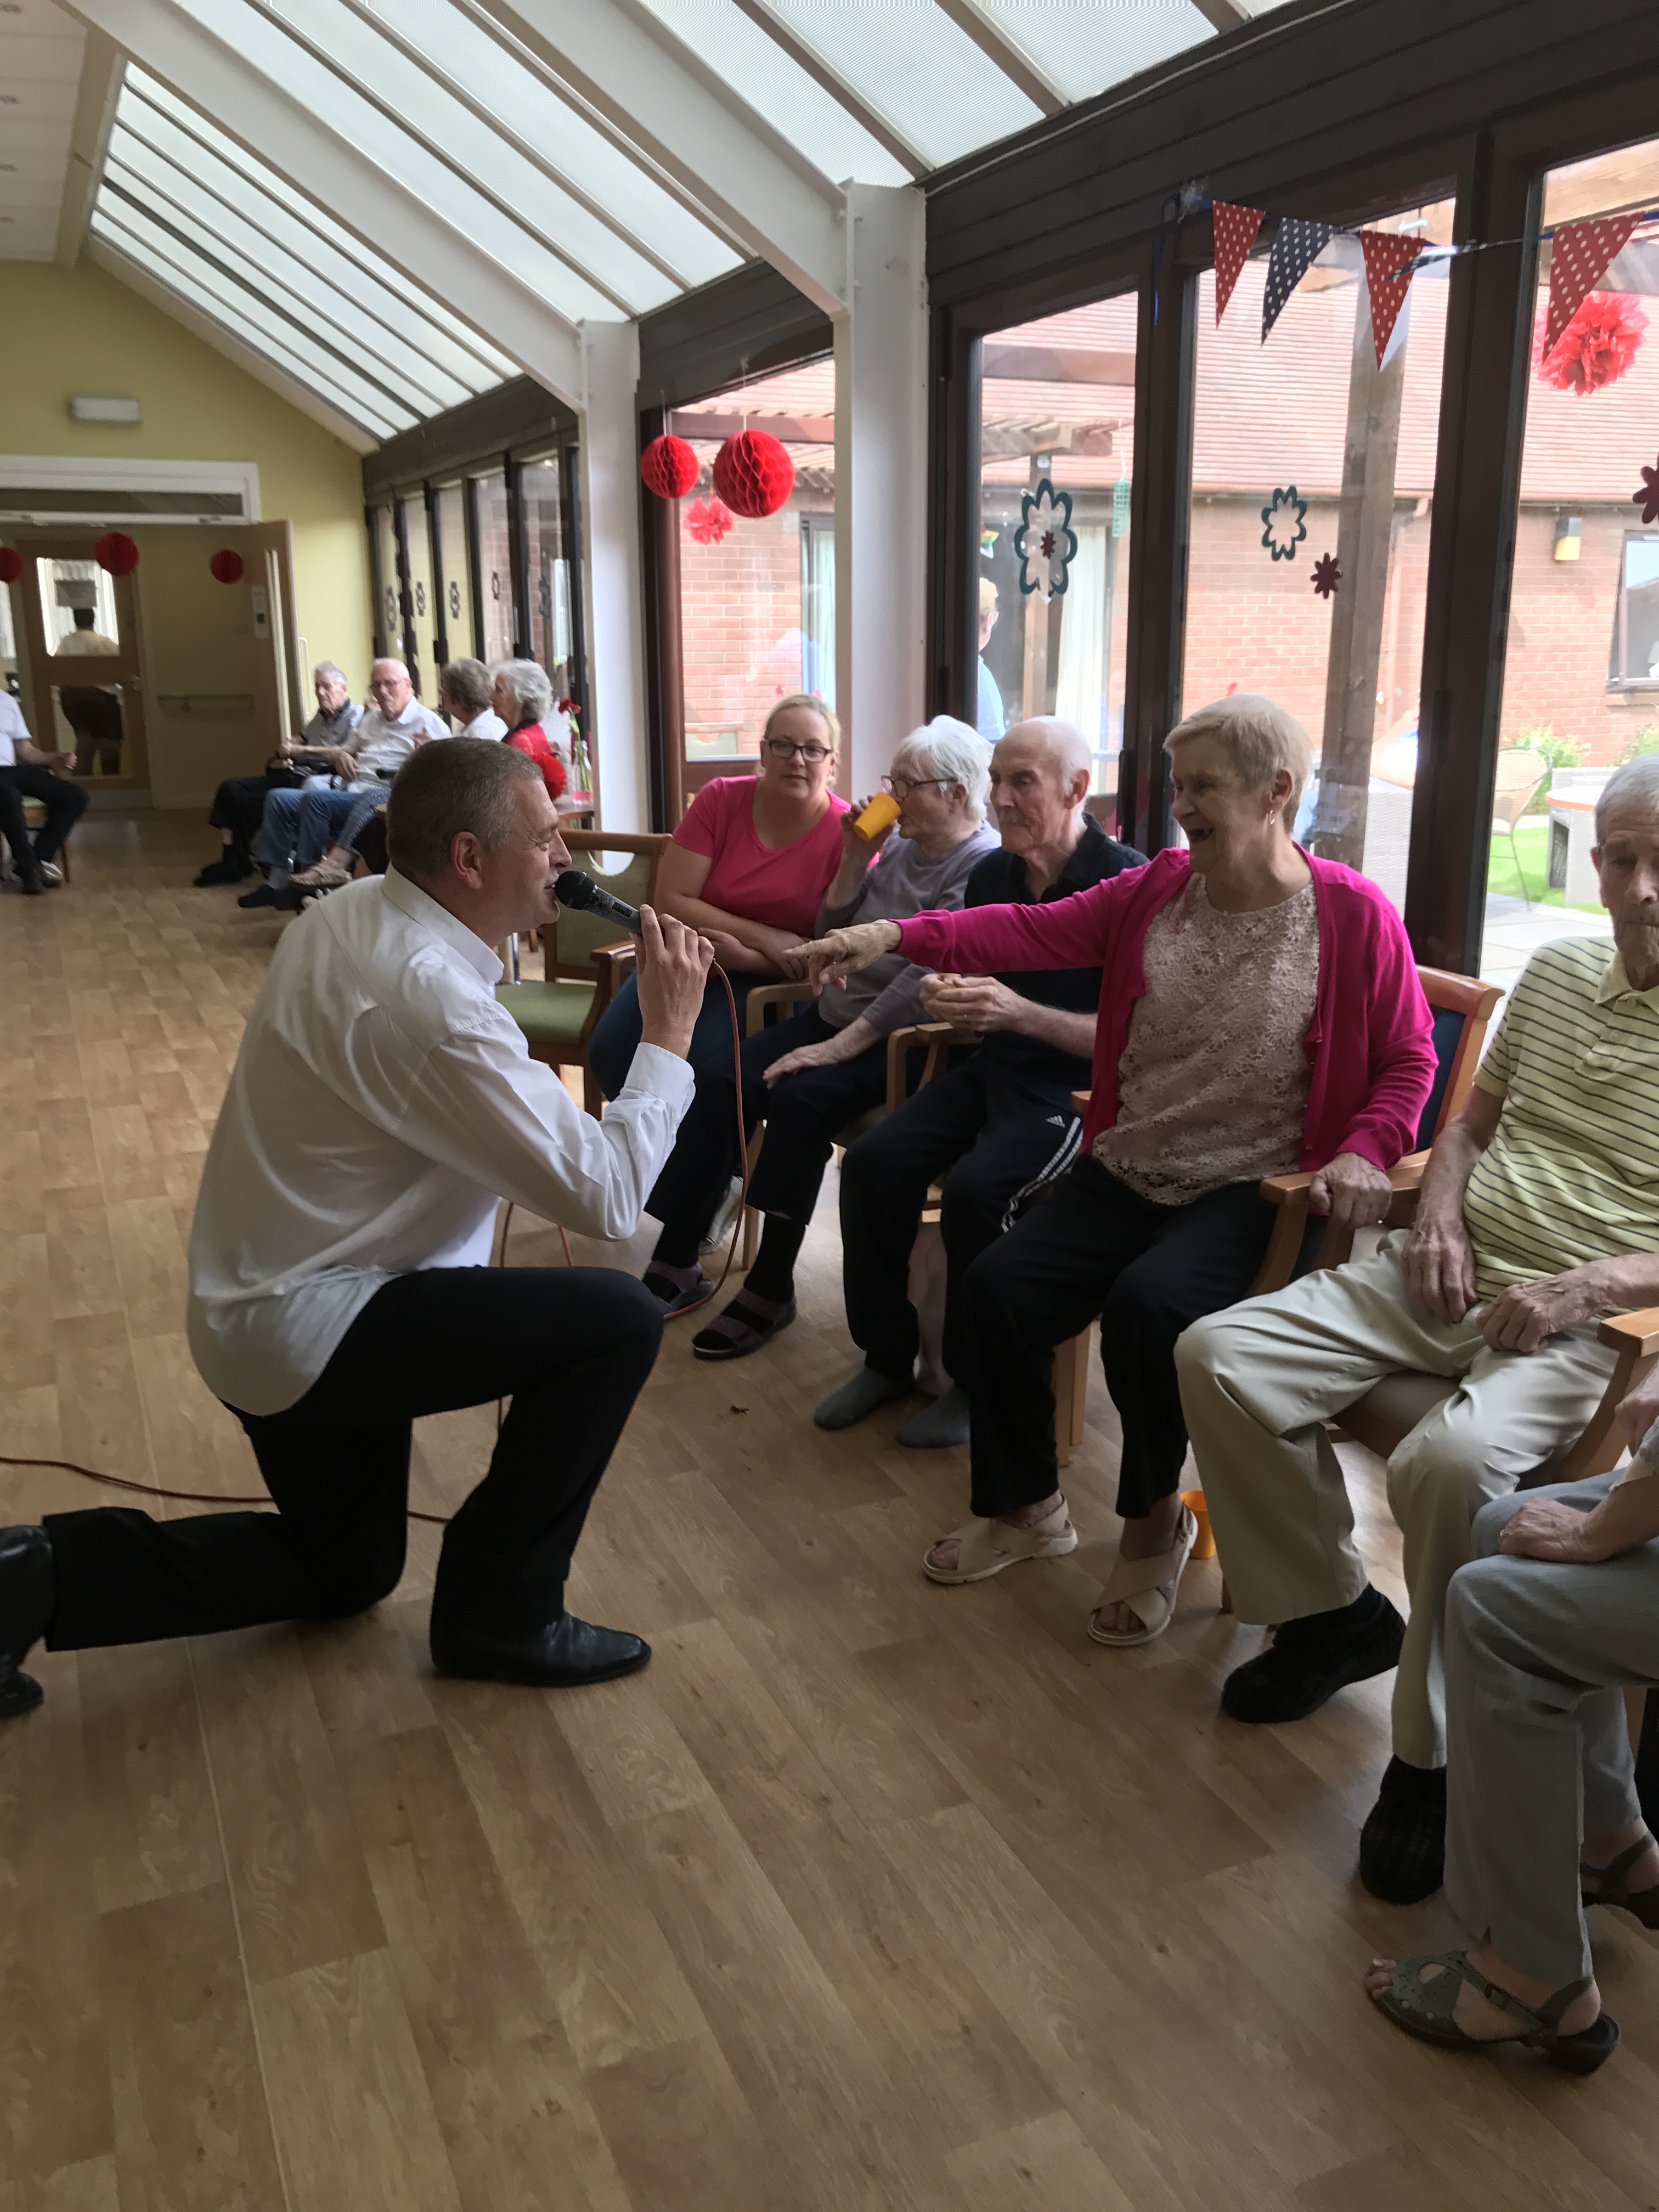 August Bank Holiday Party at Grace Court Care Centre 2017: Key Healthcare is dedicated to caring for elderly residents in safe. We have multiple dementia care homes including our care home middlesbrough, our care home St. Helen and care home saltburn. We excel in monitoring and improving care levels.